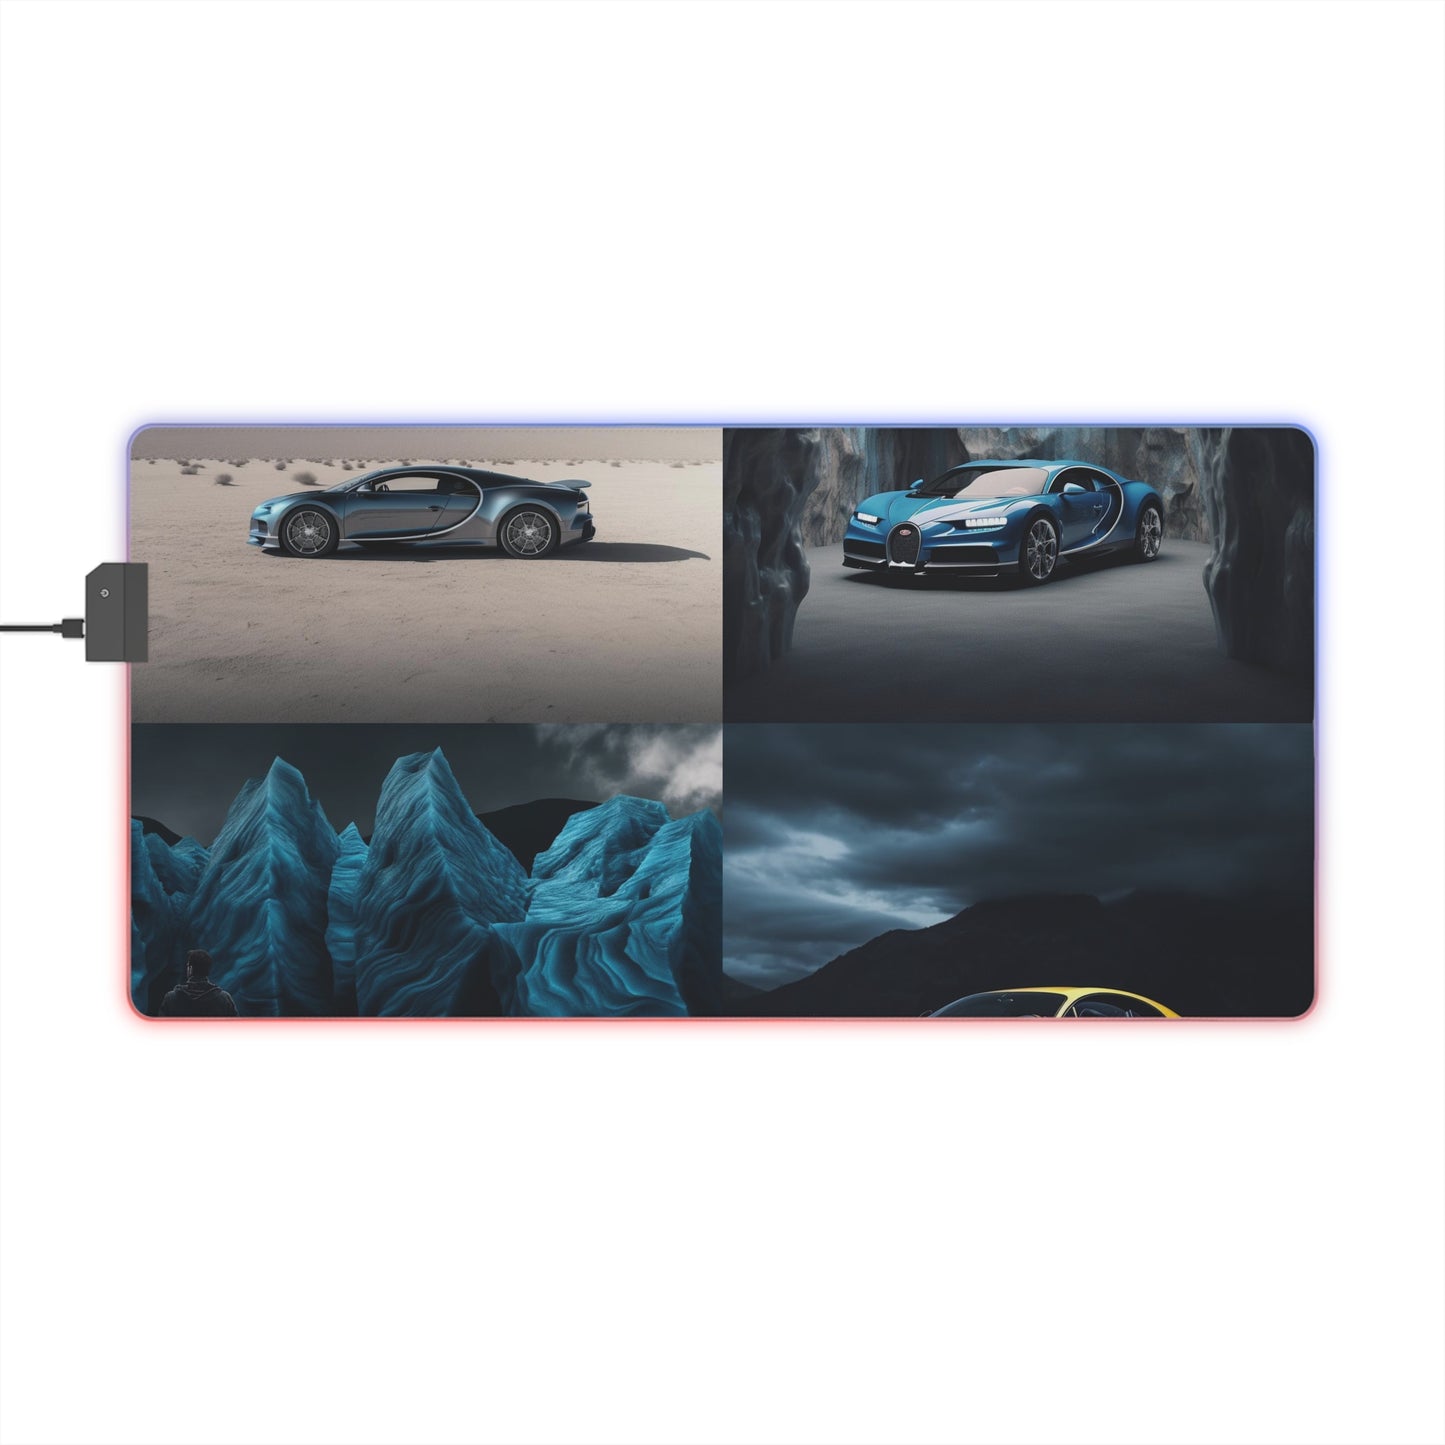 LED Gaming Mouse Pad Bugatti Real Look 5